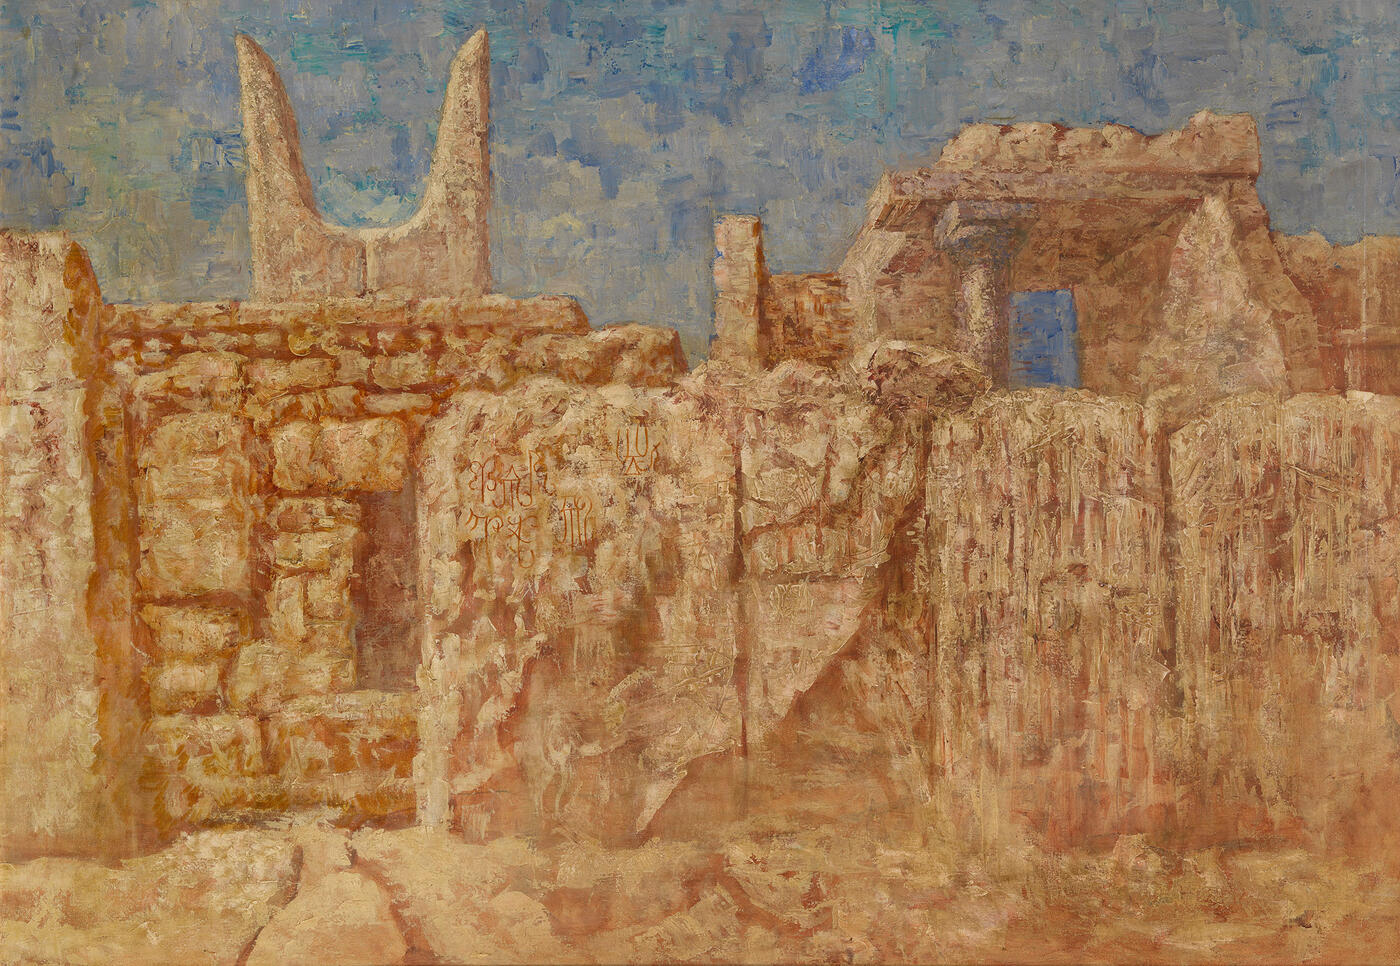 Sanctuary of the Palace at Knossos